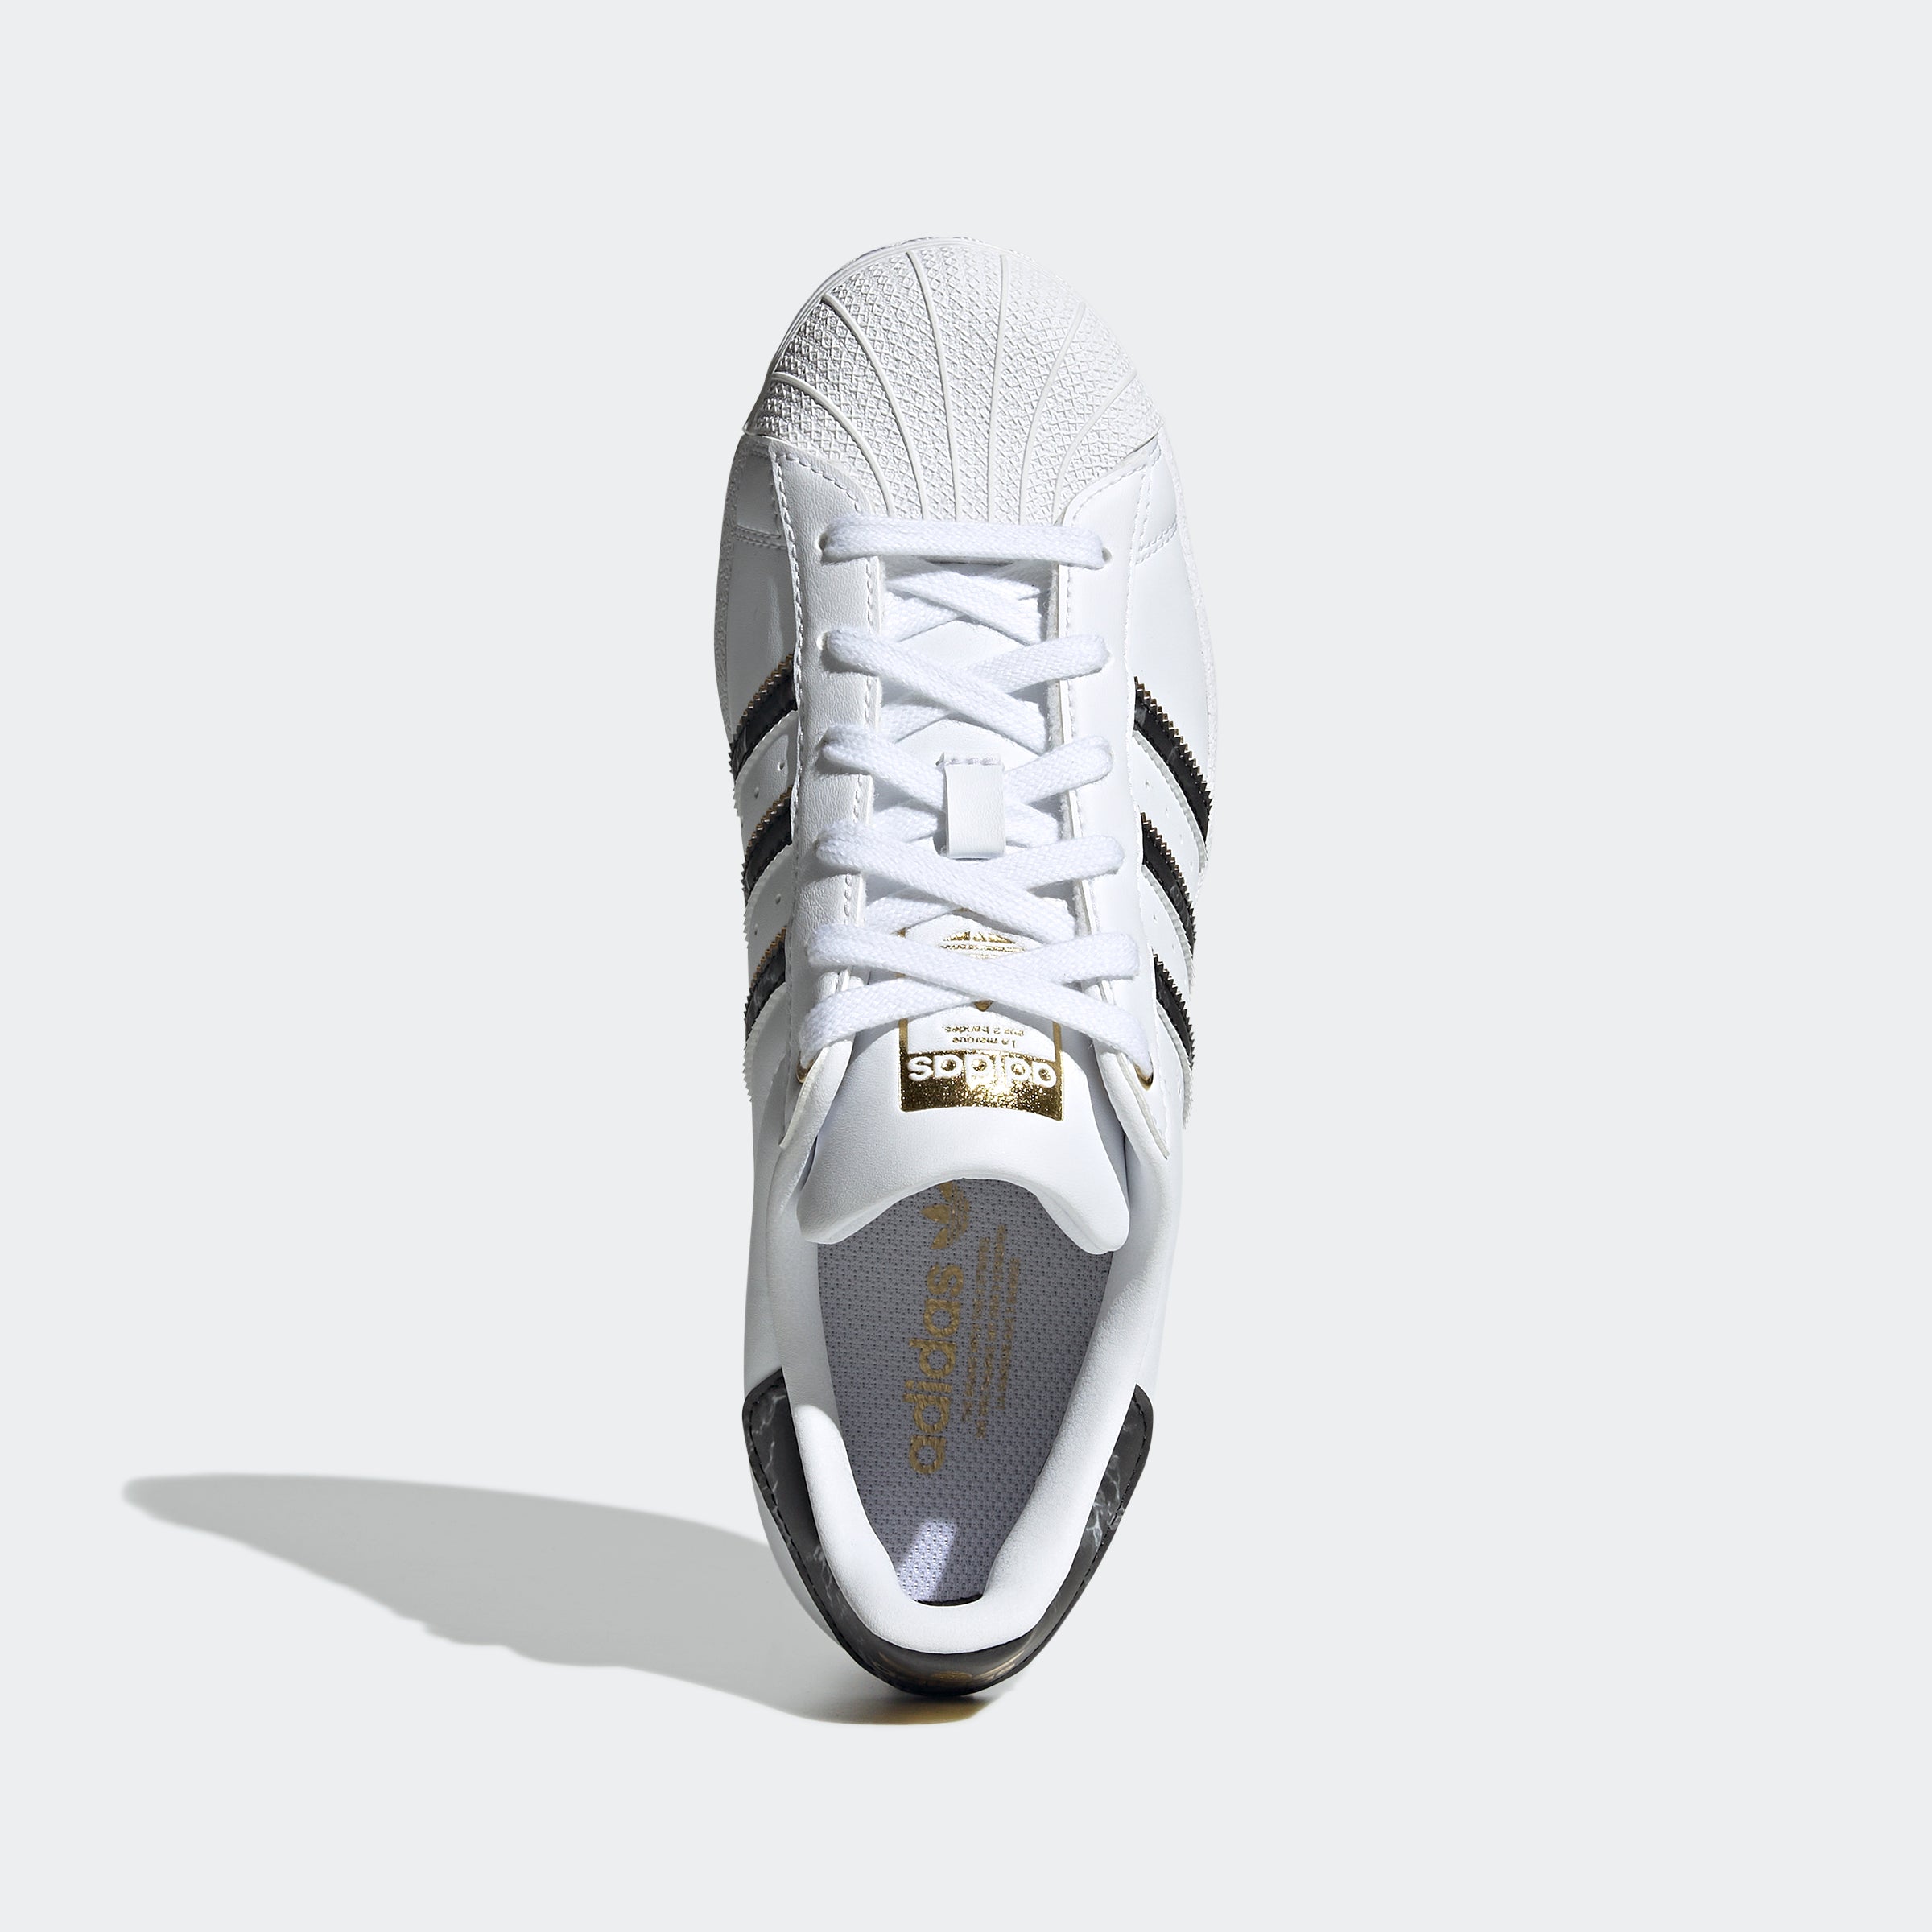 gentage At blokere Mos Women's adidas Superstar Shoes White GX1838 | Chicago City Sports